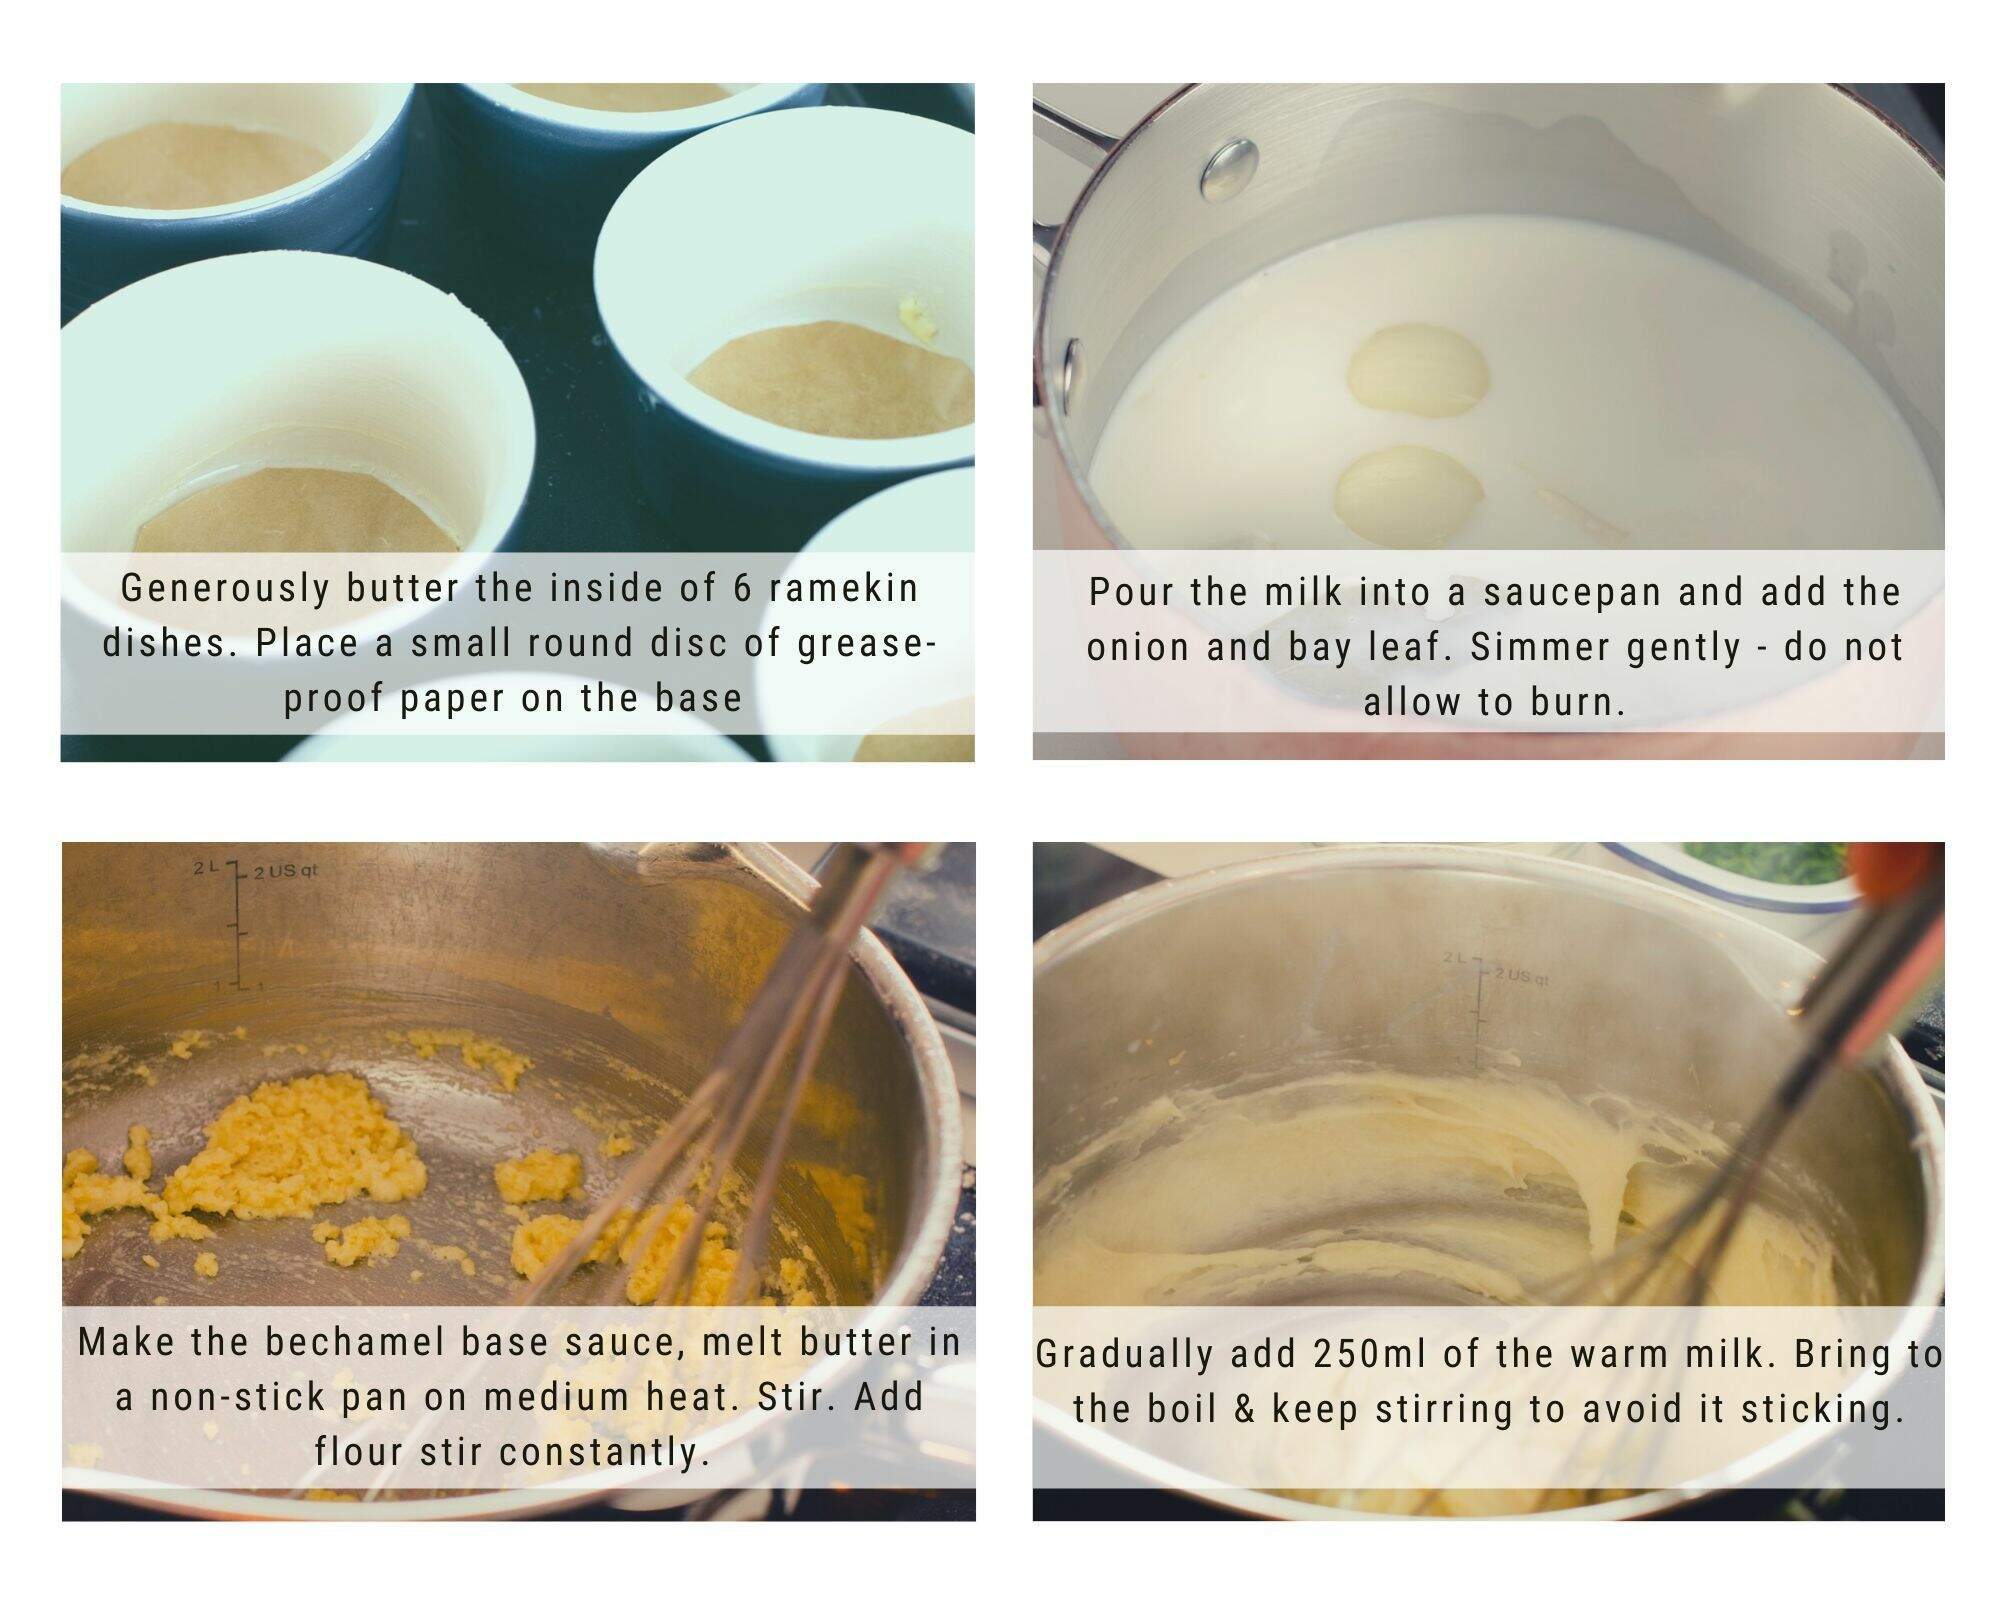 Step by step how to make twice baked cheese souffles by Lost in Food.